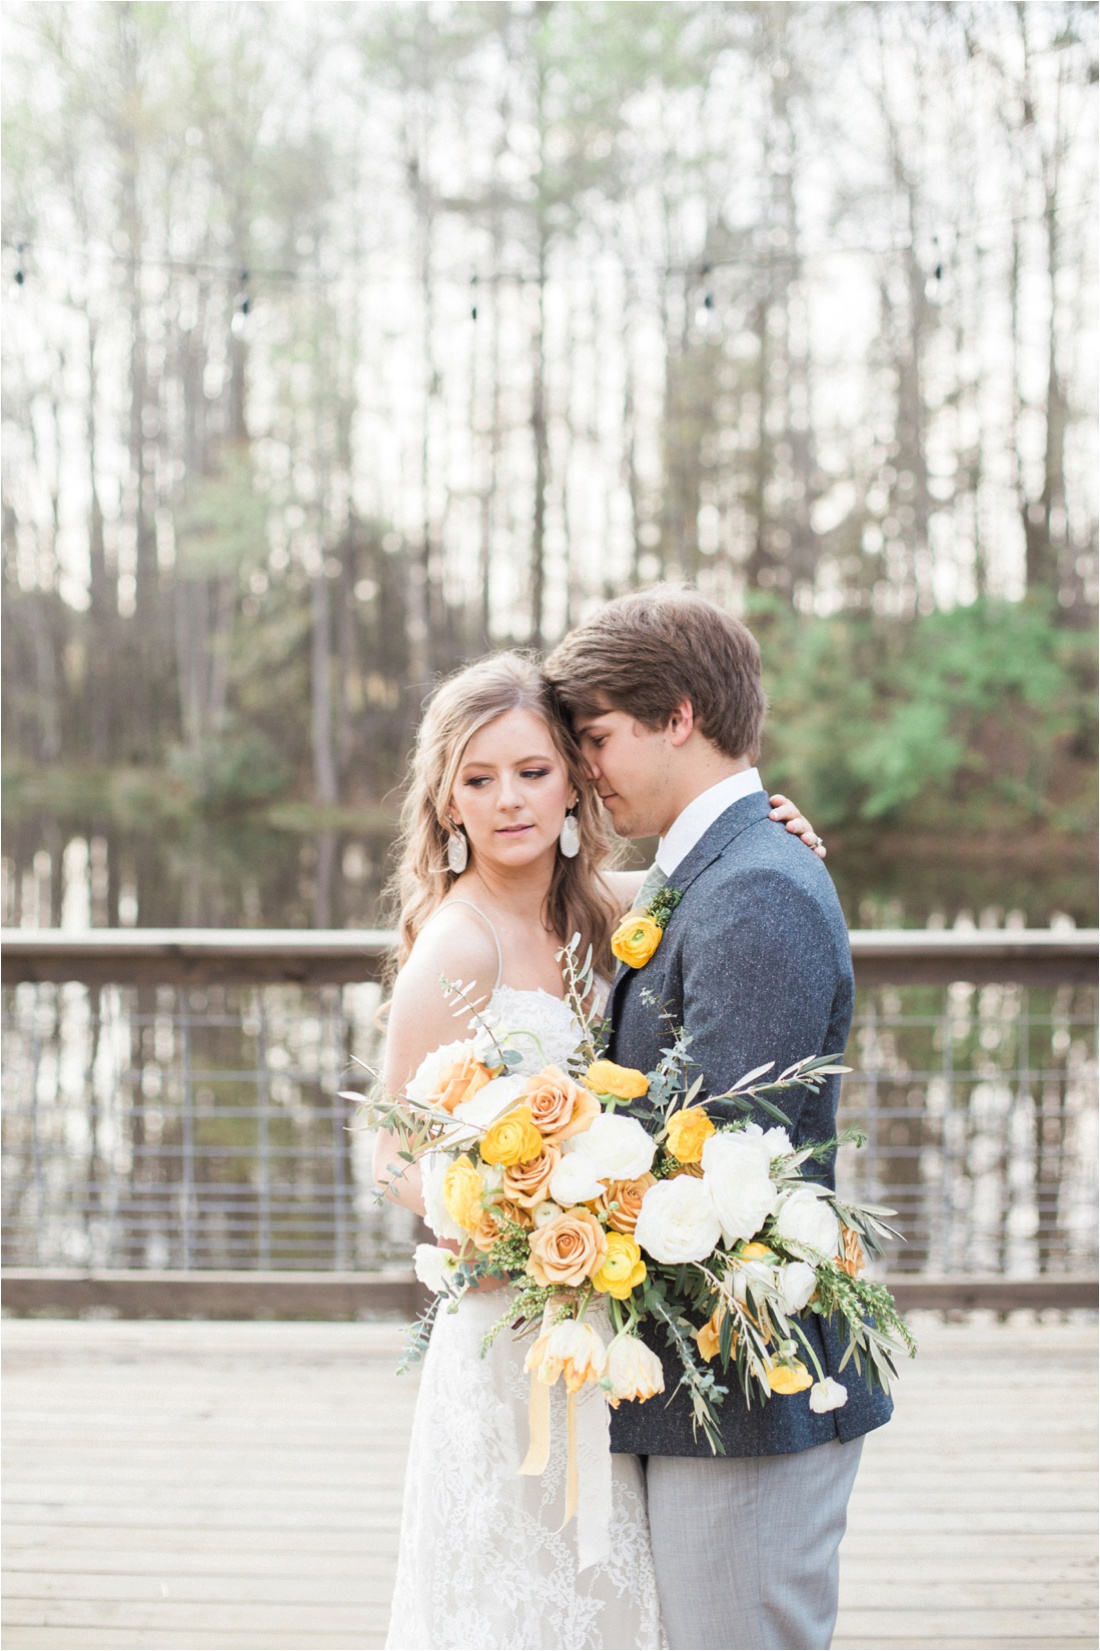 The Perfect Palette, Yellow and Green Wedding Inspiration, Gold Wedding Accents, Rustic Elegance Wedding Inspiration, Atlanta Wedding Photographer